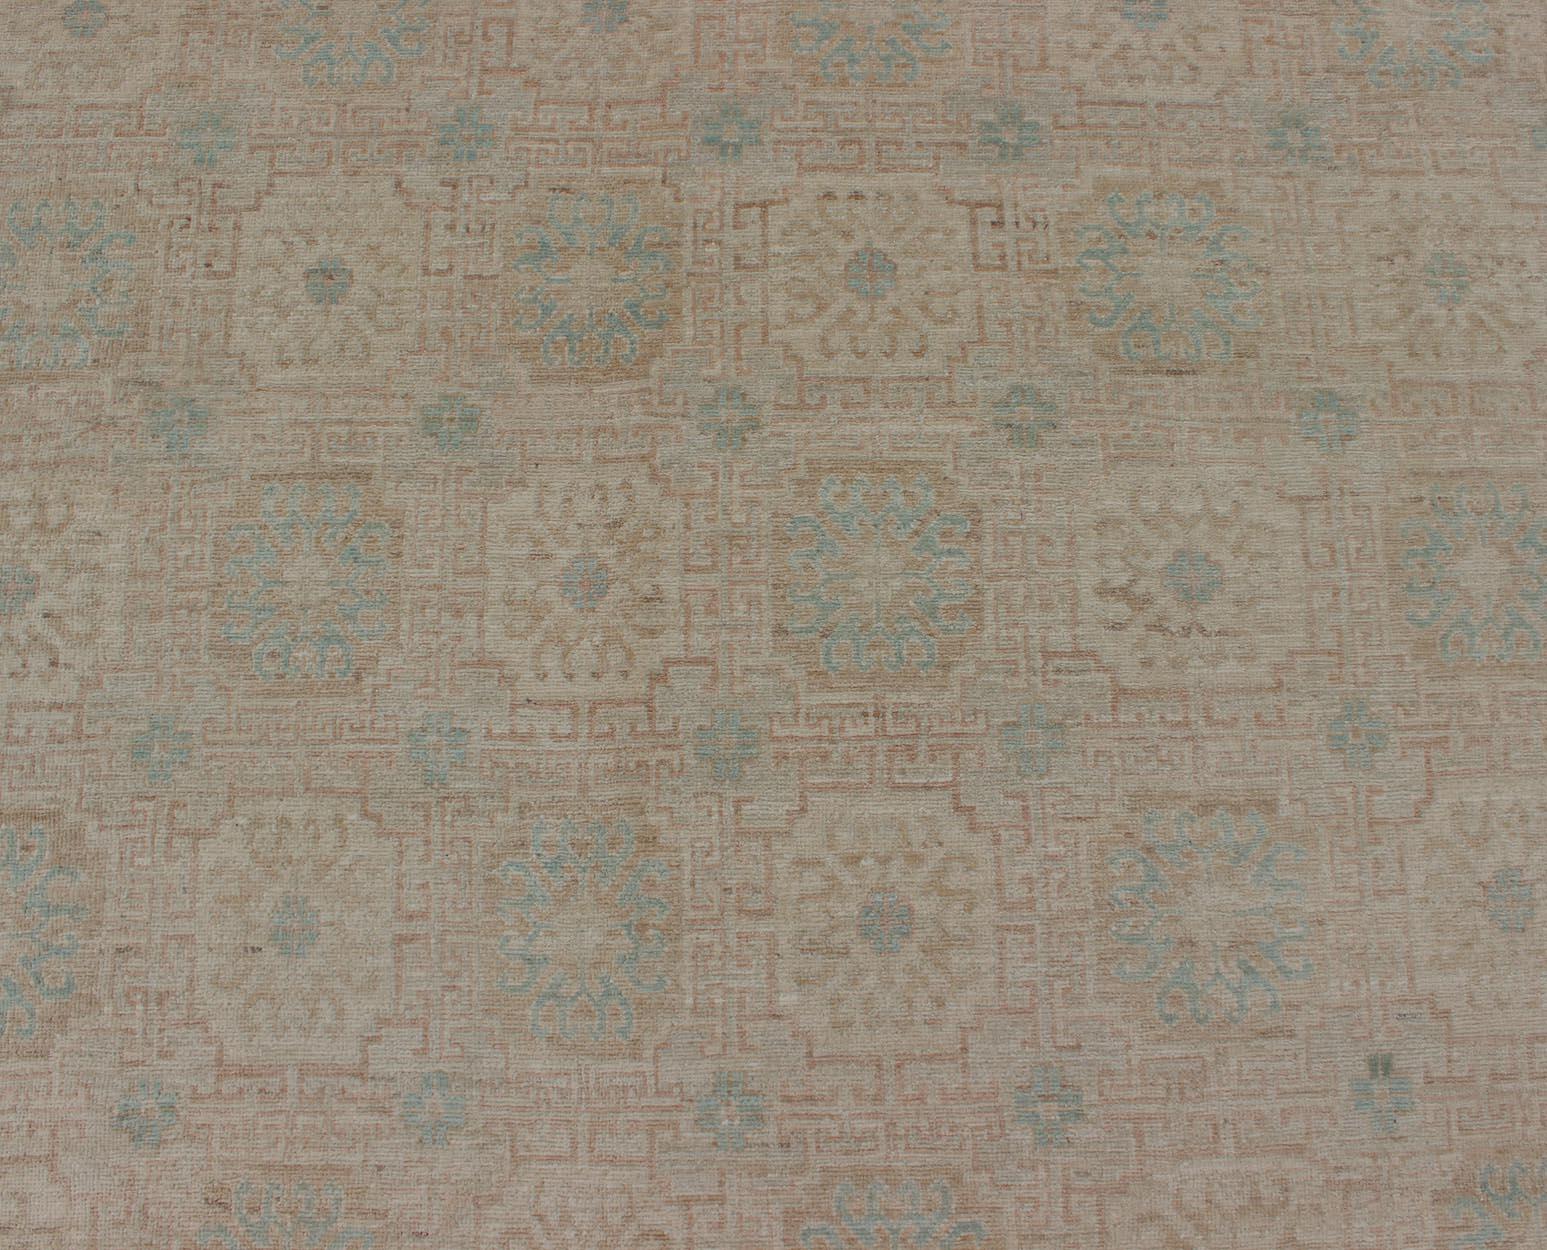 Khotan Design Rug with Geometric Medallions in Tan and Turquoise For Sale 1